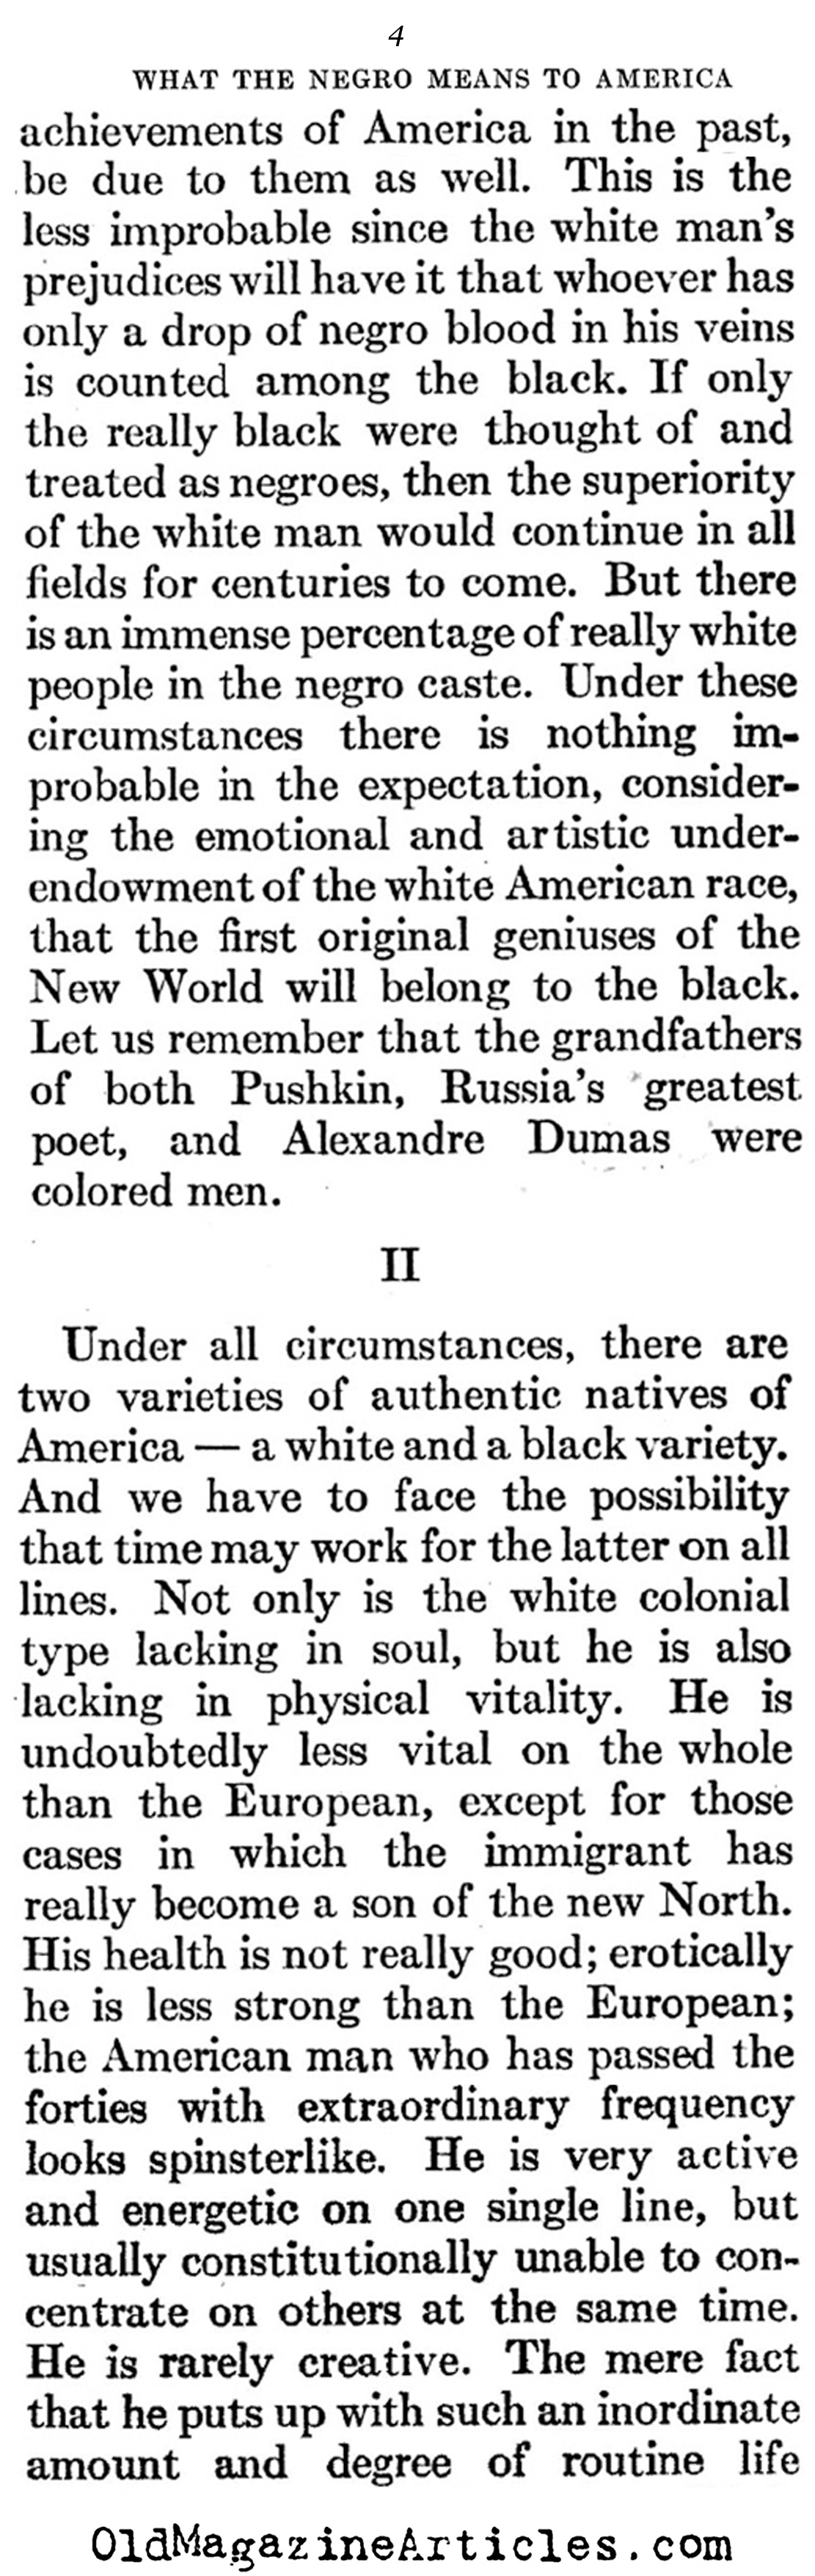 ''What the Negro Means to America'' (Atlantic Monthly, 1929)